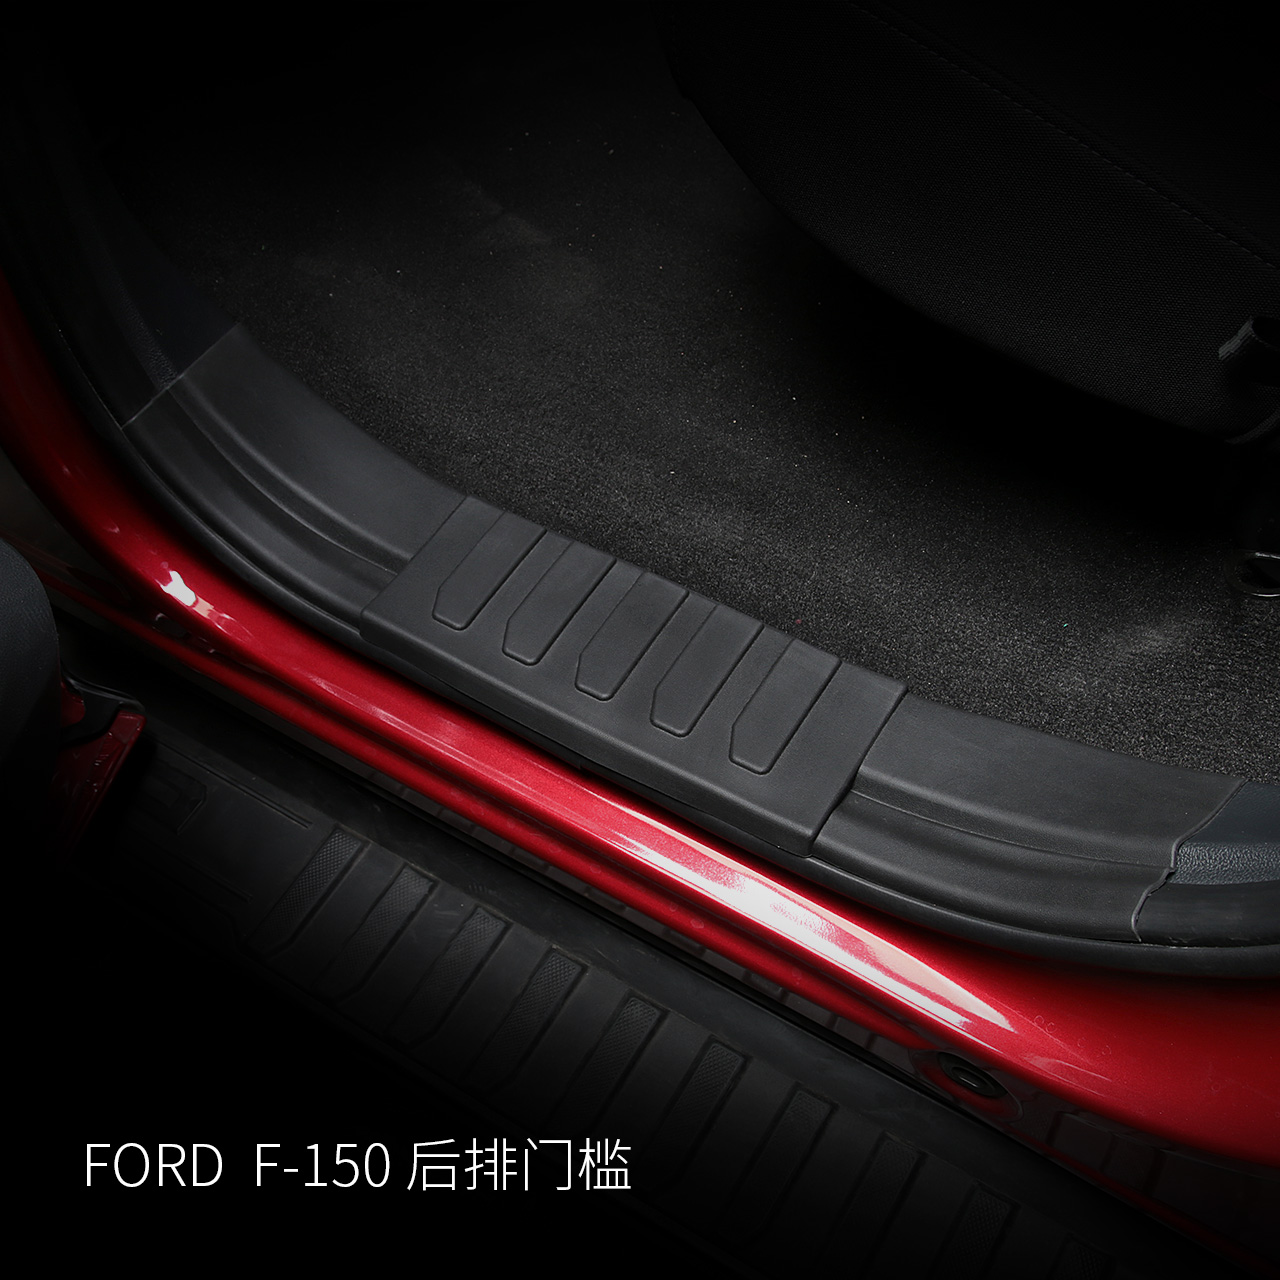 2021 Door Sill Scuff Plate Cover for F150 Door Sill Guard Protector Step Decal Car Accessories Pickup